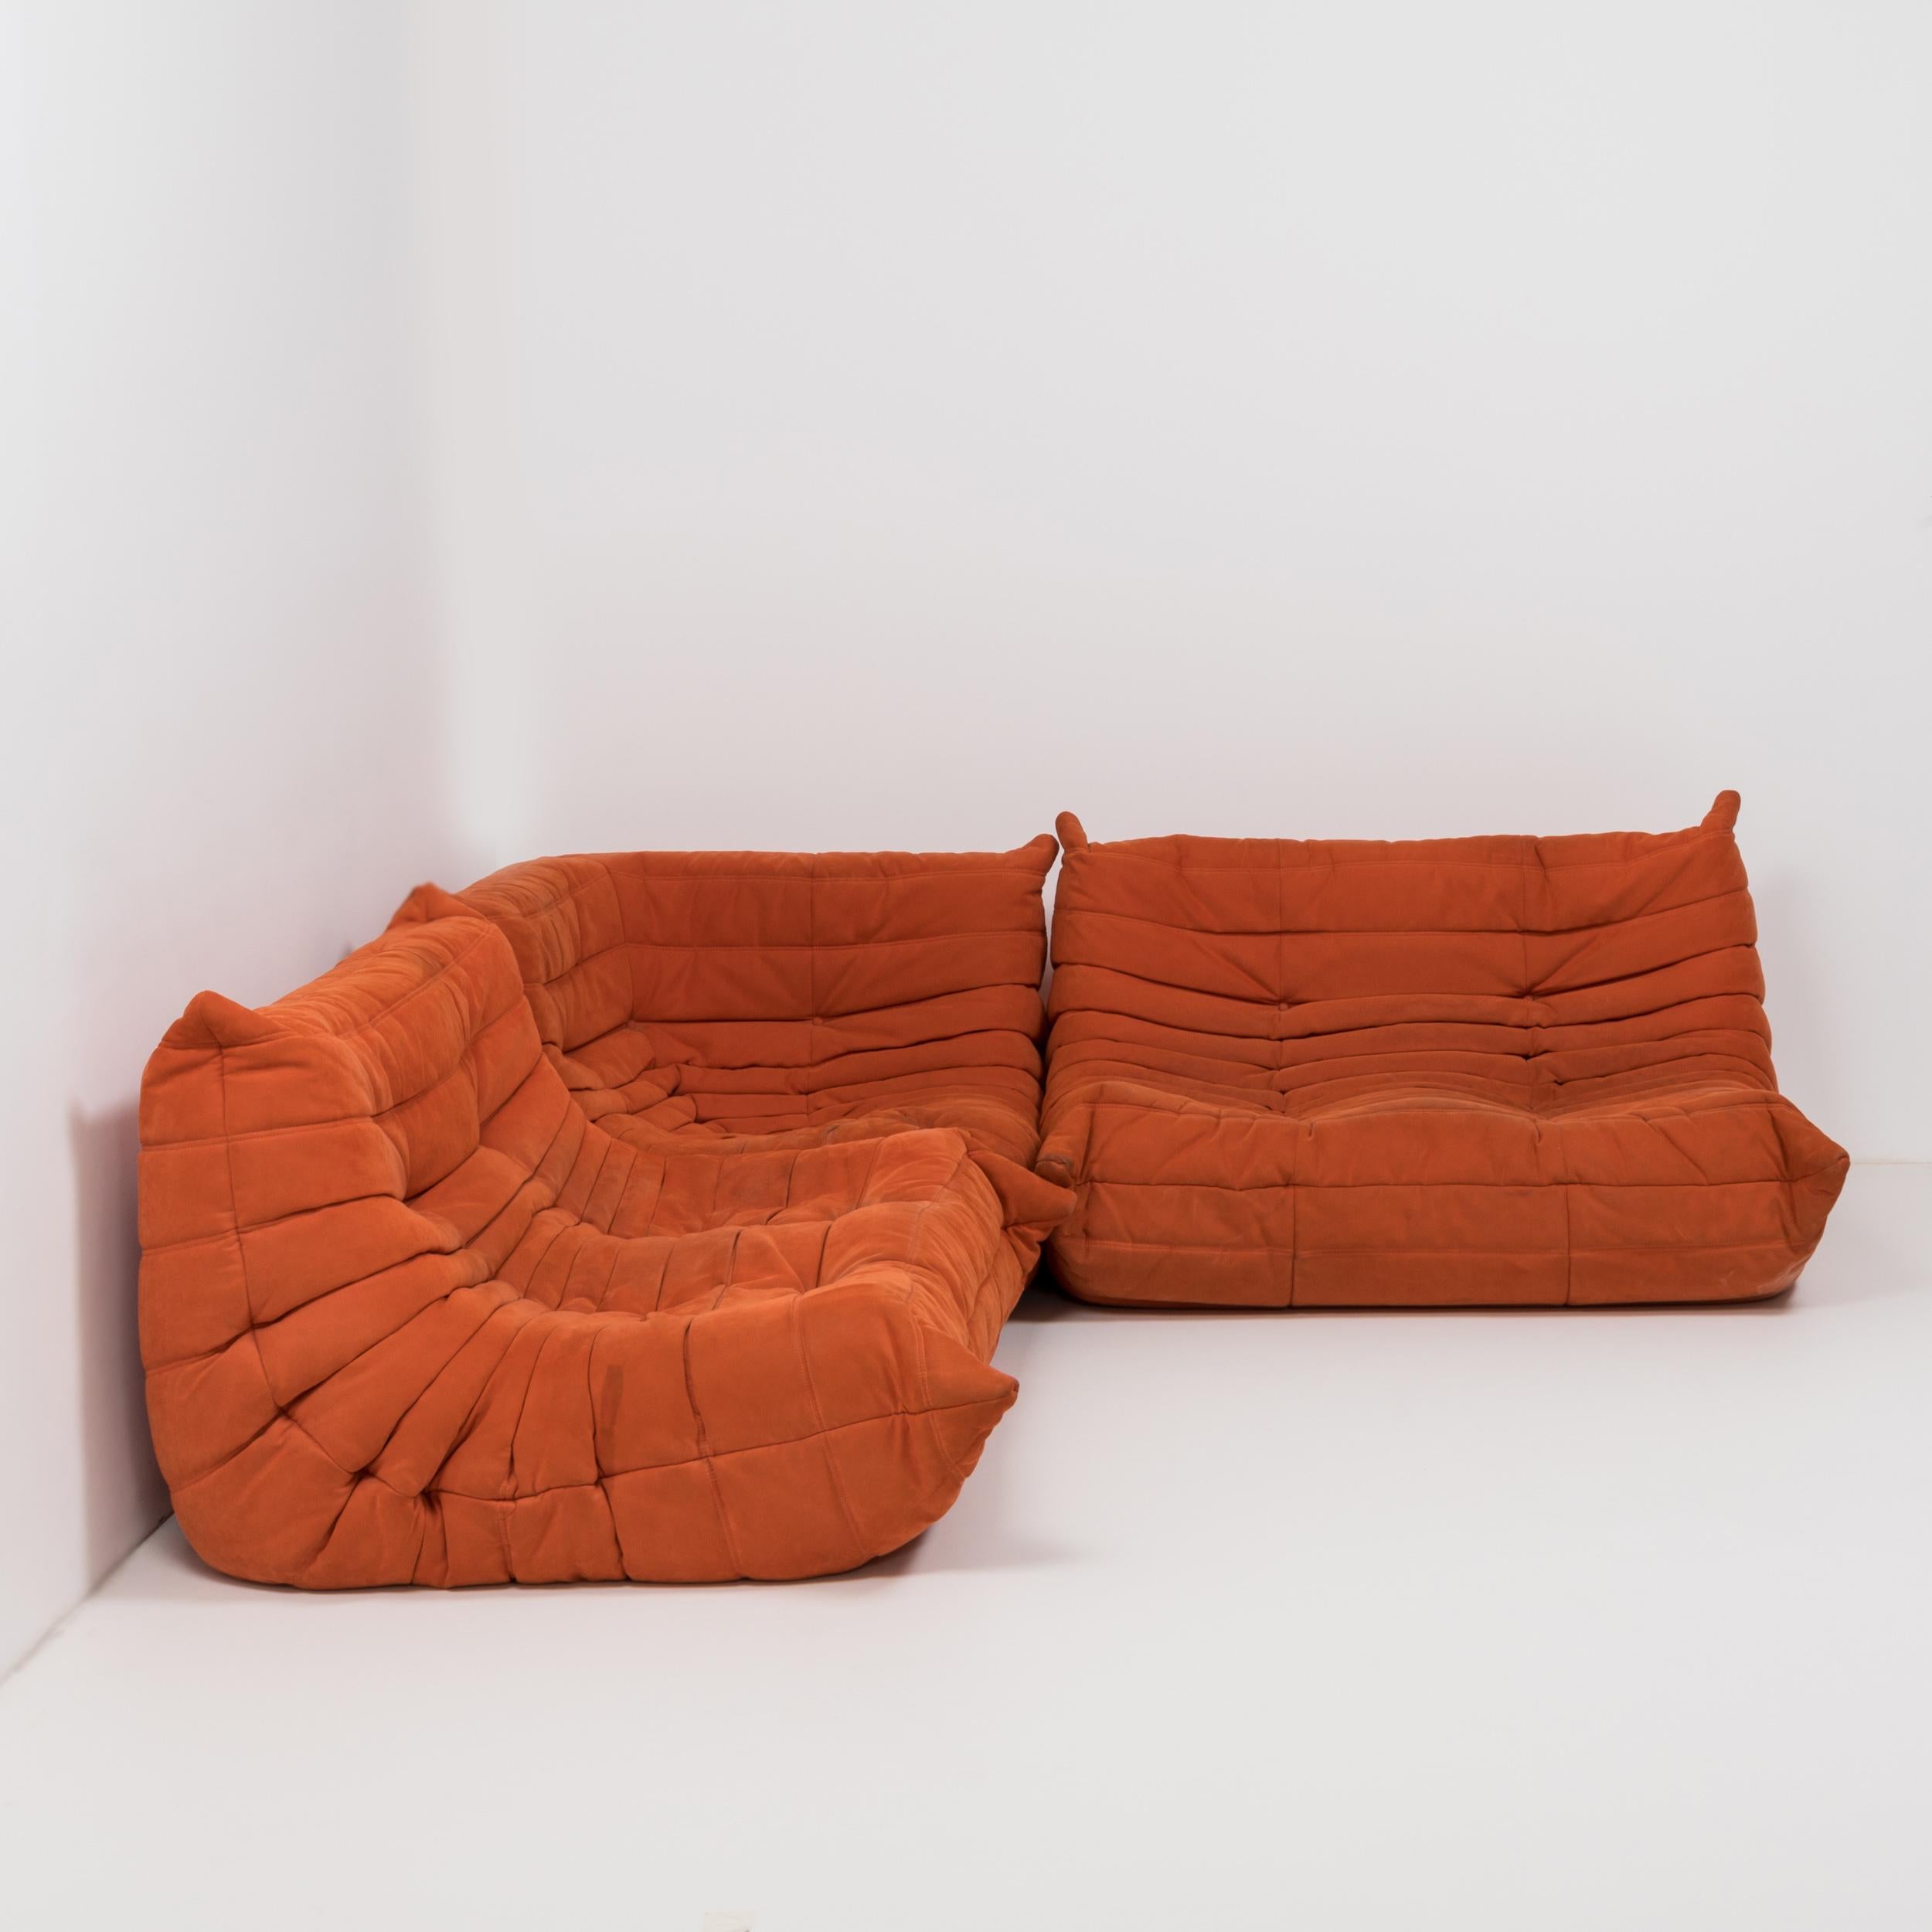 The iconic Togo sofa, originally designed by Michael Ducaroy for Ligne Roset in 1973, has become a design Classic.

This three-piece modular set is incredibly versatile and can be configured into one corner sofa or split for a multitude of seating